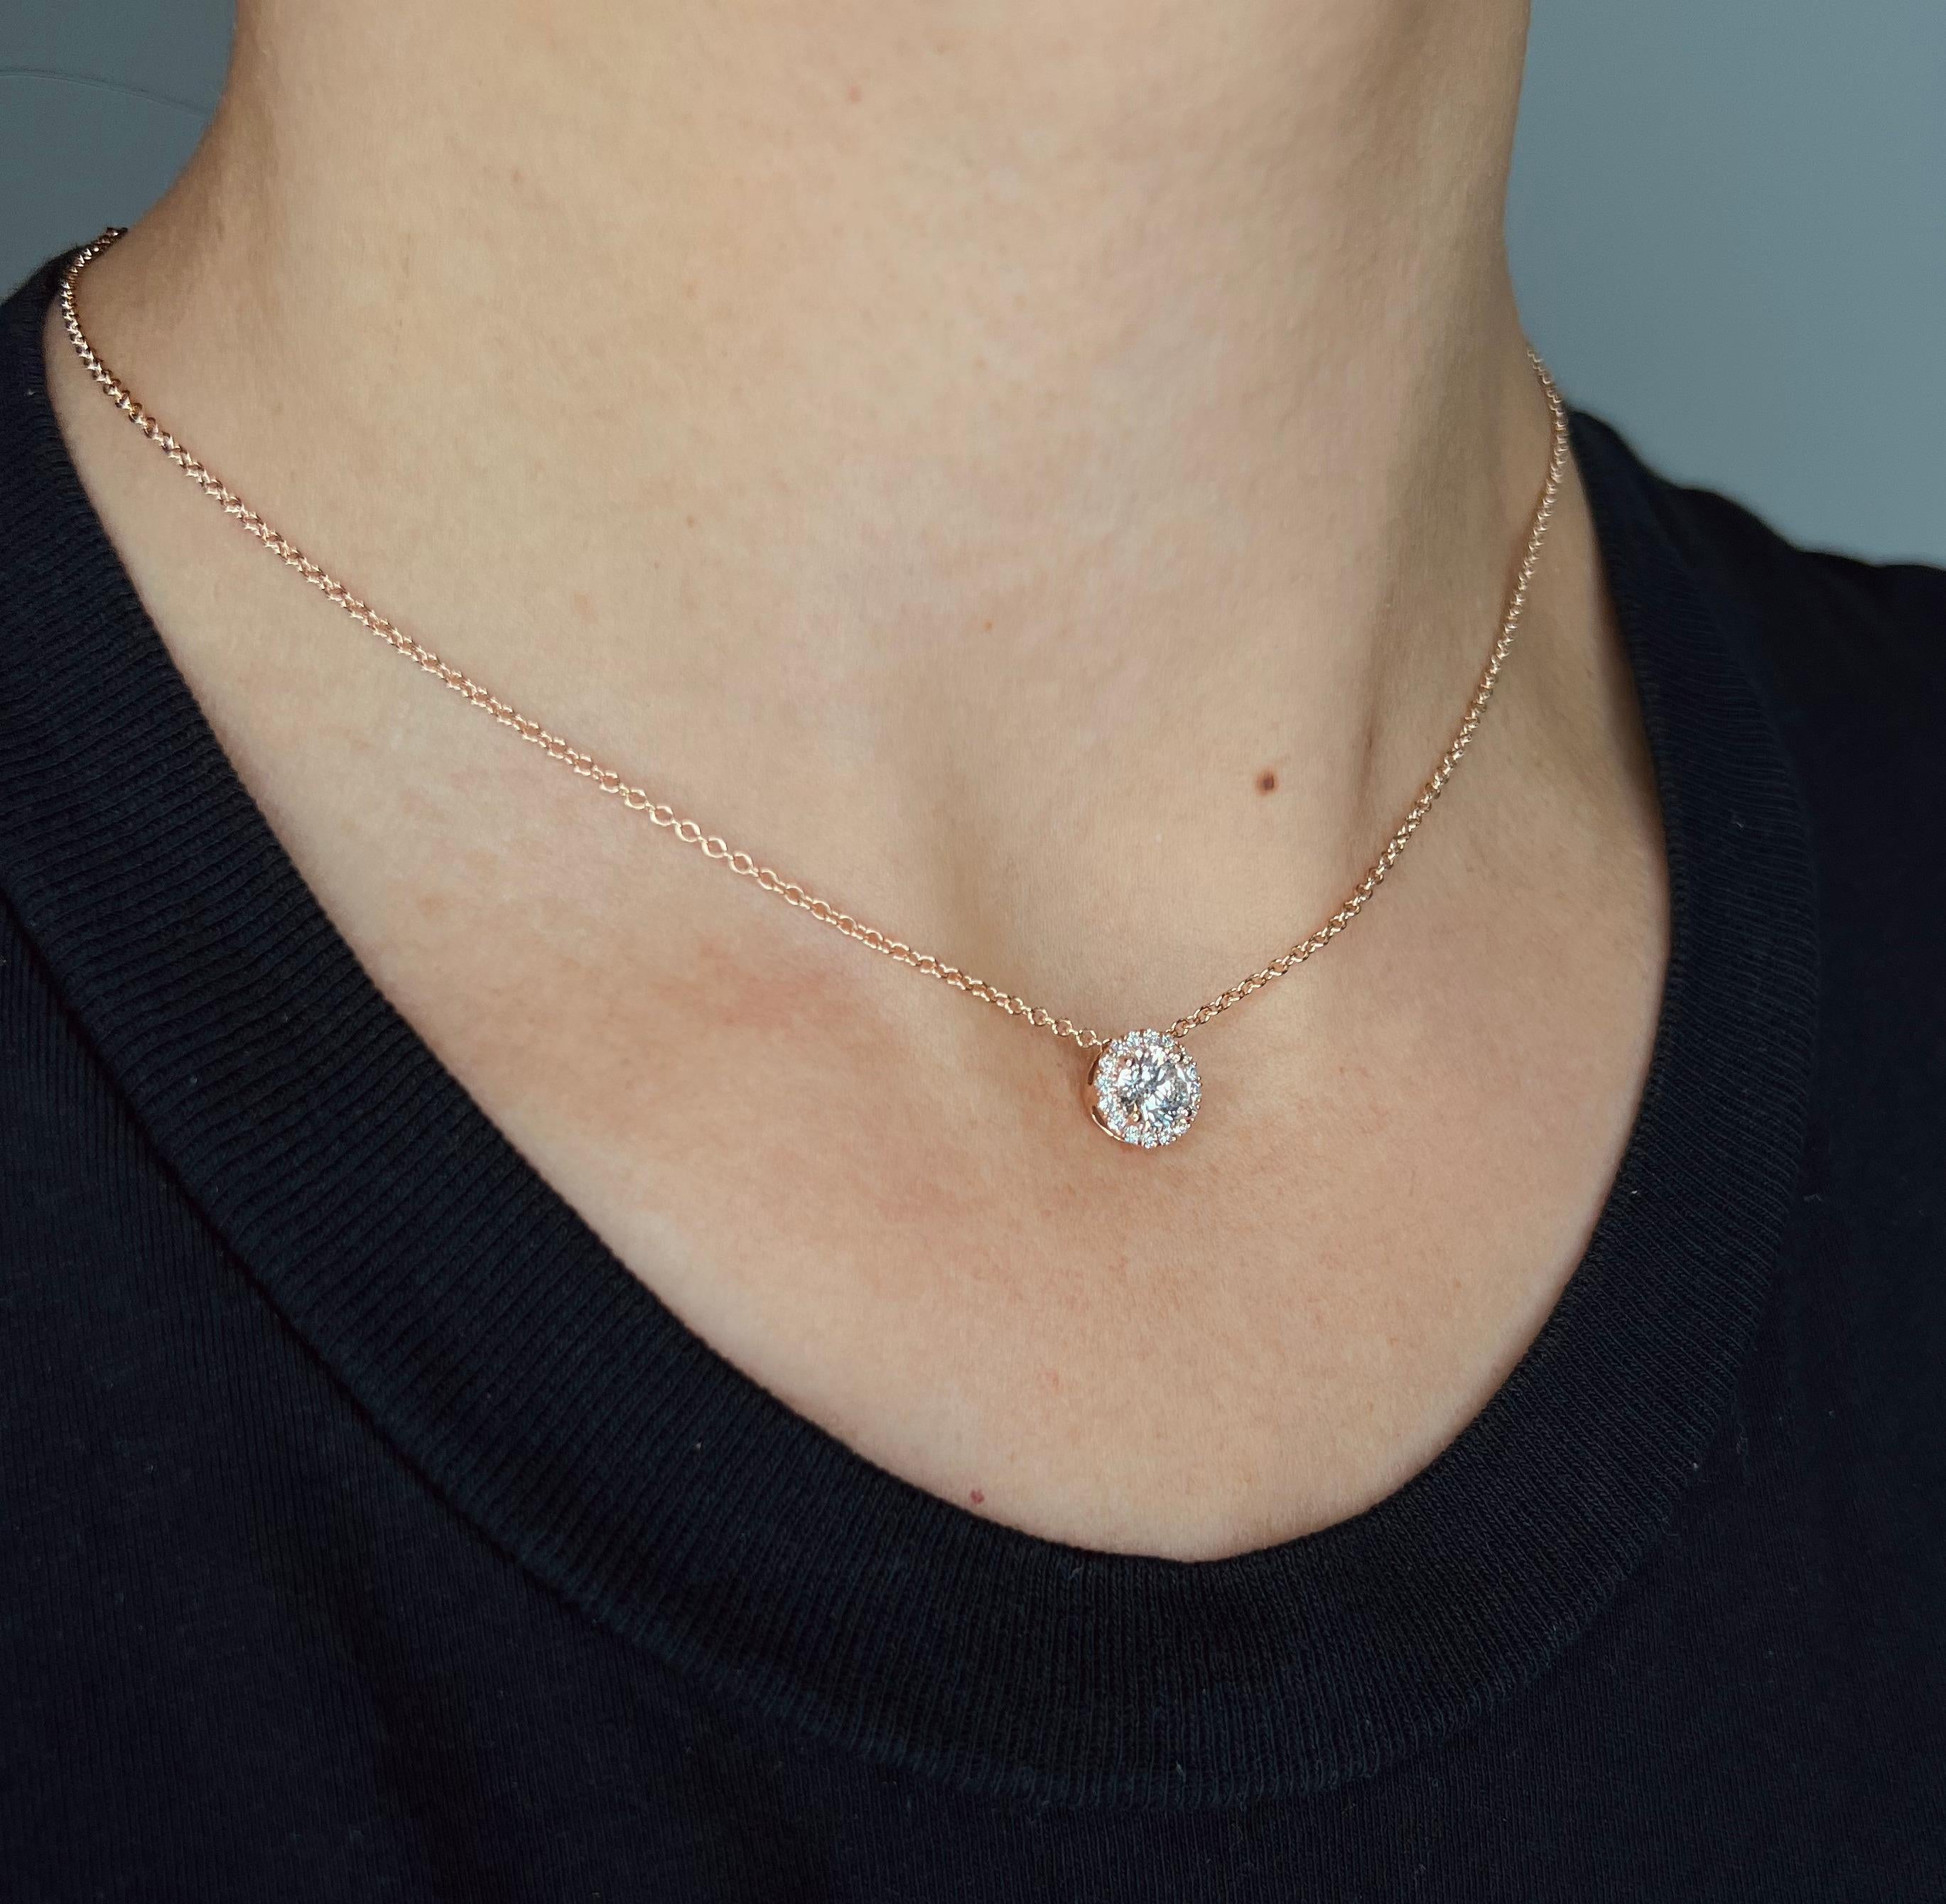 This diamond circle pendant provides a glowing chic look.
Metal: 14k Gold
Diamond Total Carats (Includes 0.15ct halo): 0.90 Total (0.75 Center) 
Diamond Cut: Round Natural Diamonds (Not Lab Grown)
Diamond Clarity: VS
Diamond Color: F
Color: White